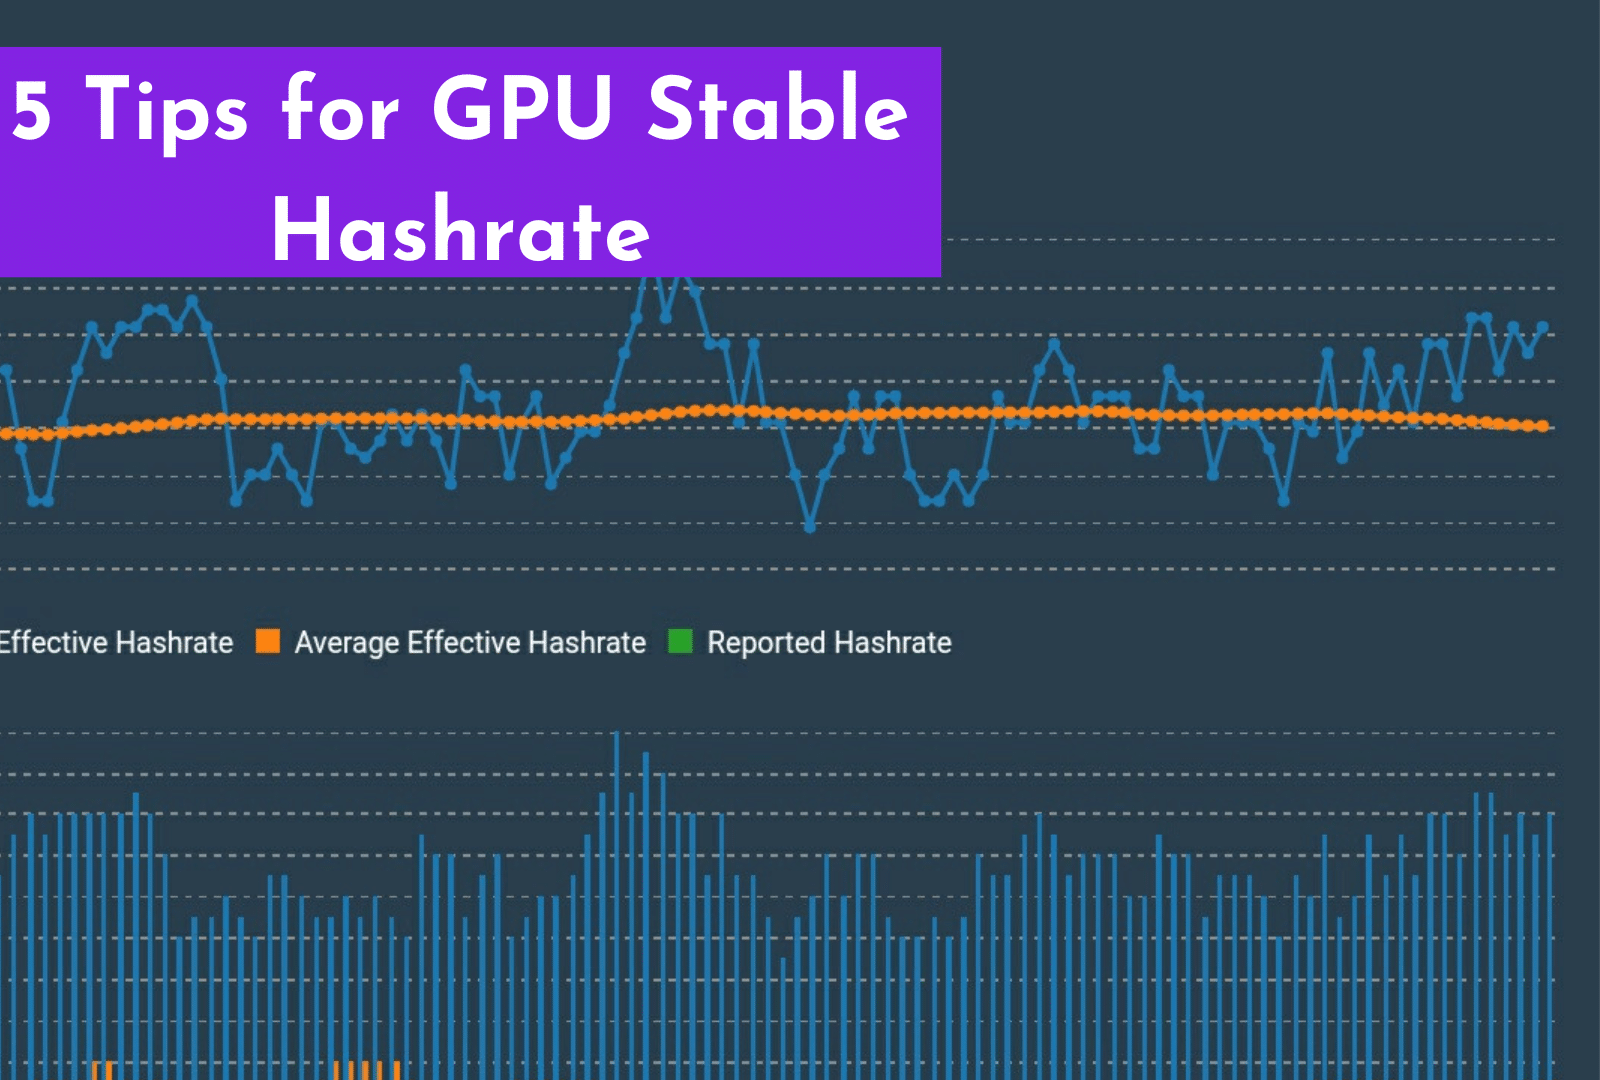 C:\Users\Mohsin\Downloads\5 Tips for GPU Stable Hashrate.png